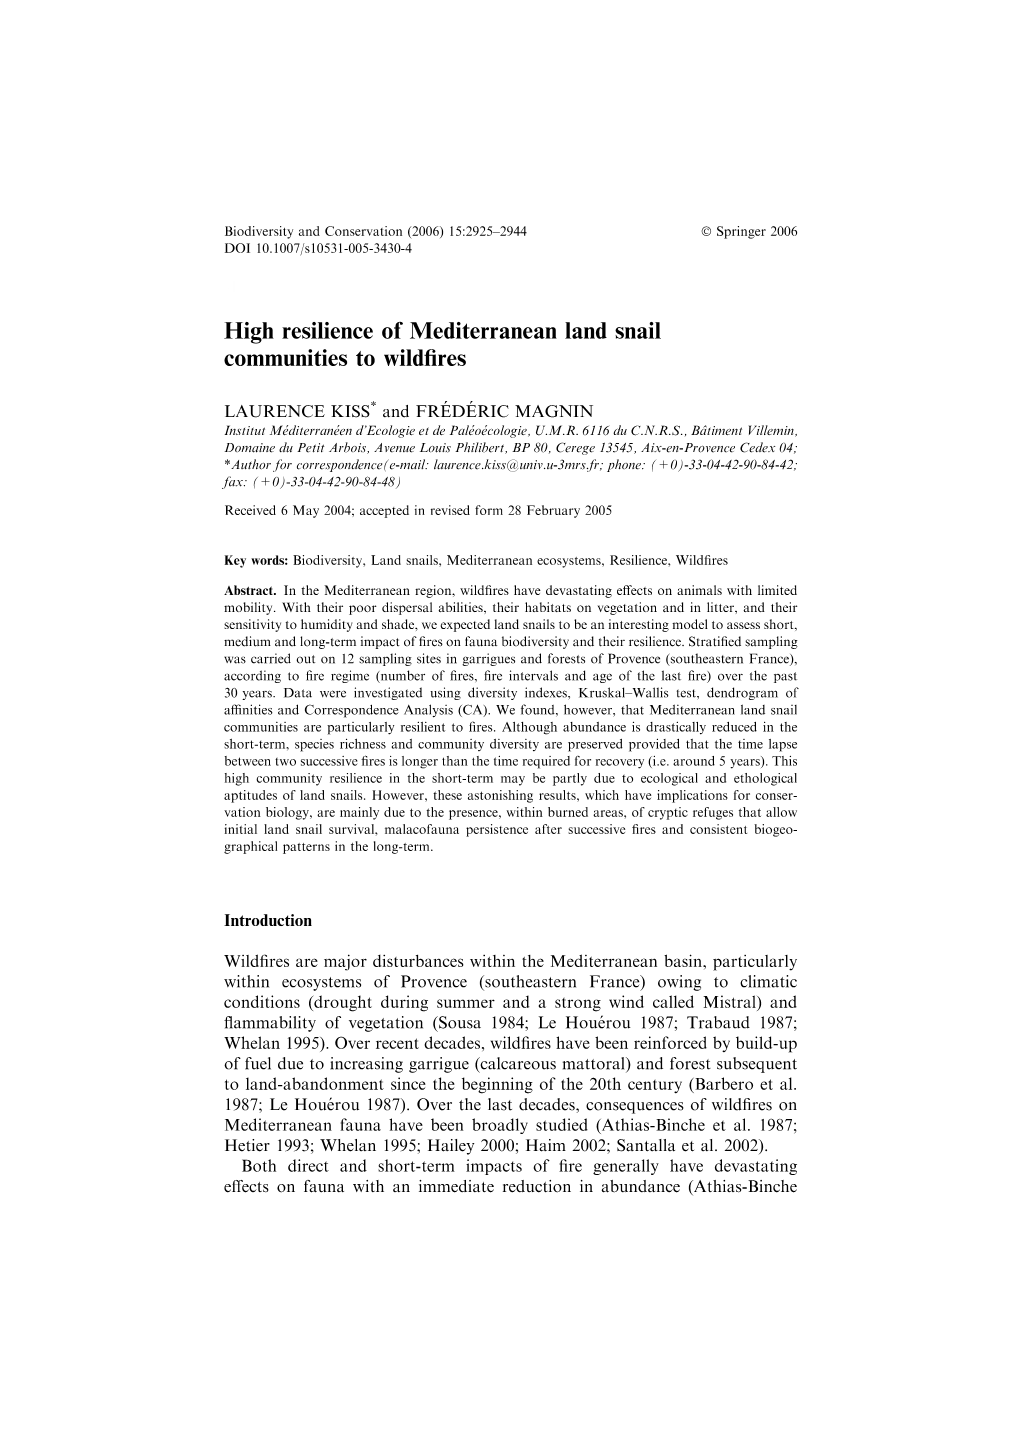 High Resilience of Mediterranean Land Snail Communities to Wildfires